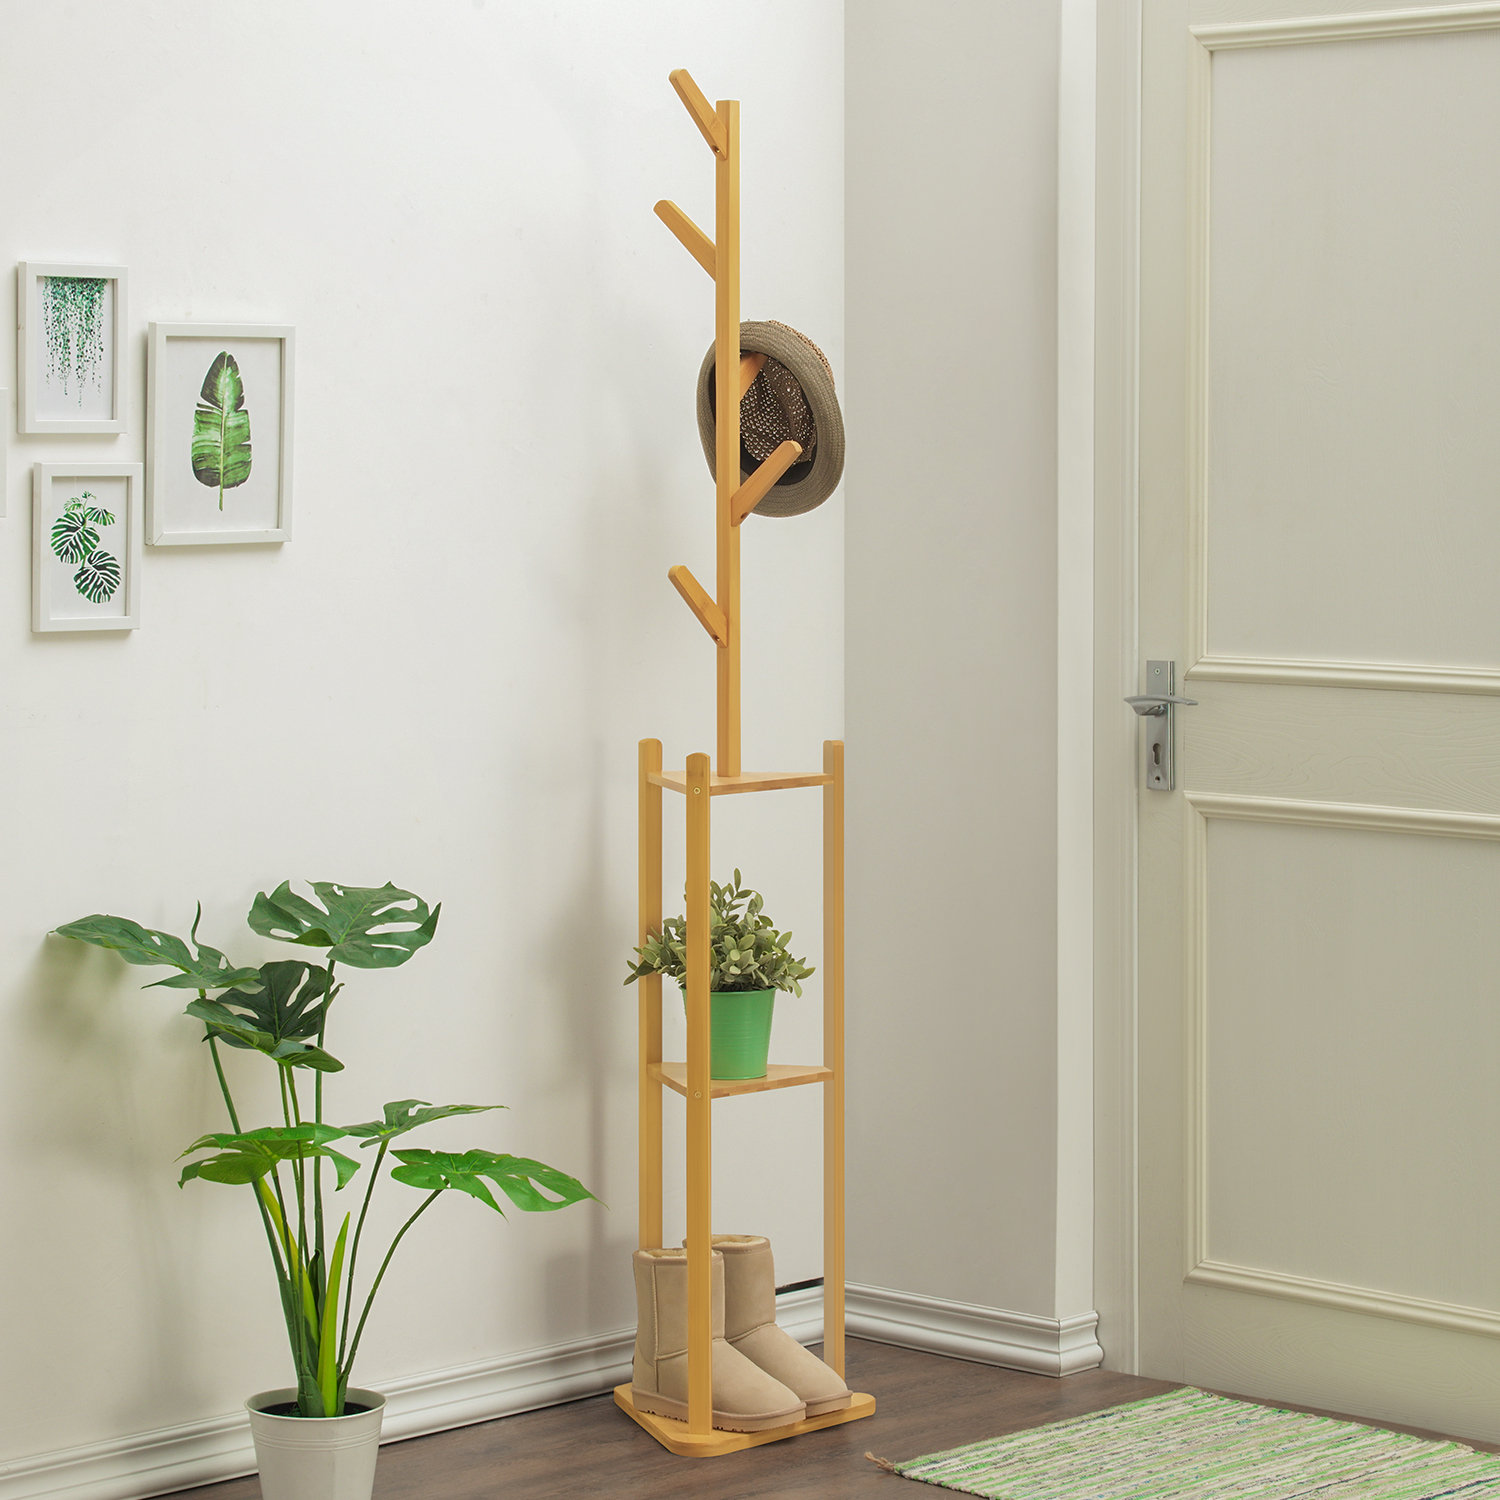 Bamboo Wall Hanger Coat Rack Colorful Simple Clothes Hook-Free